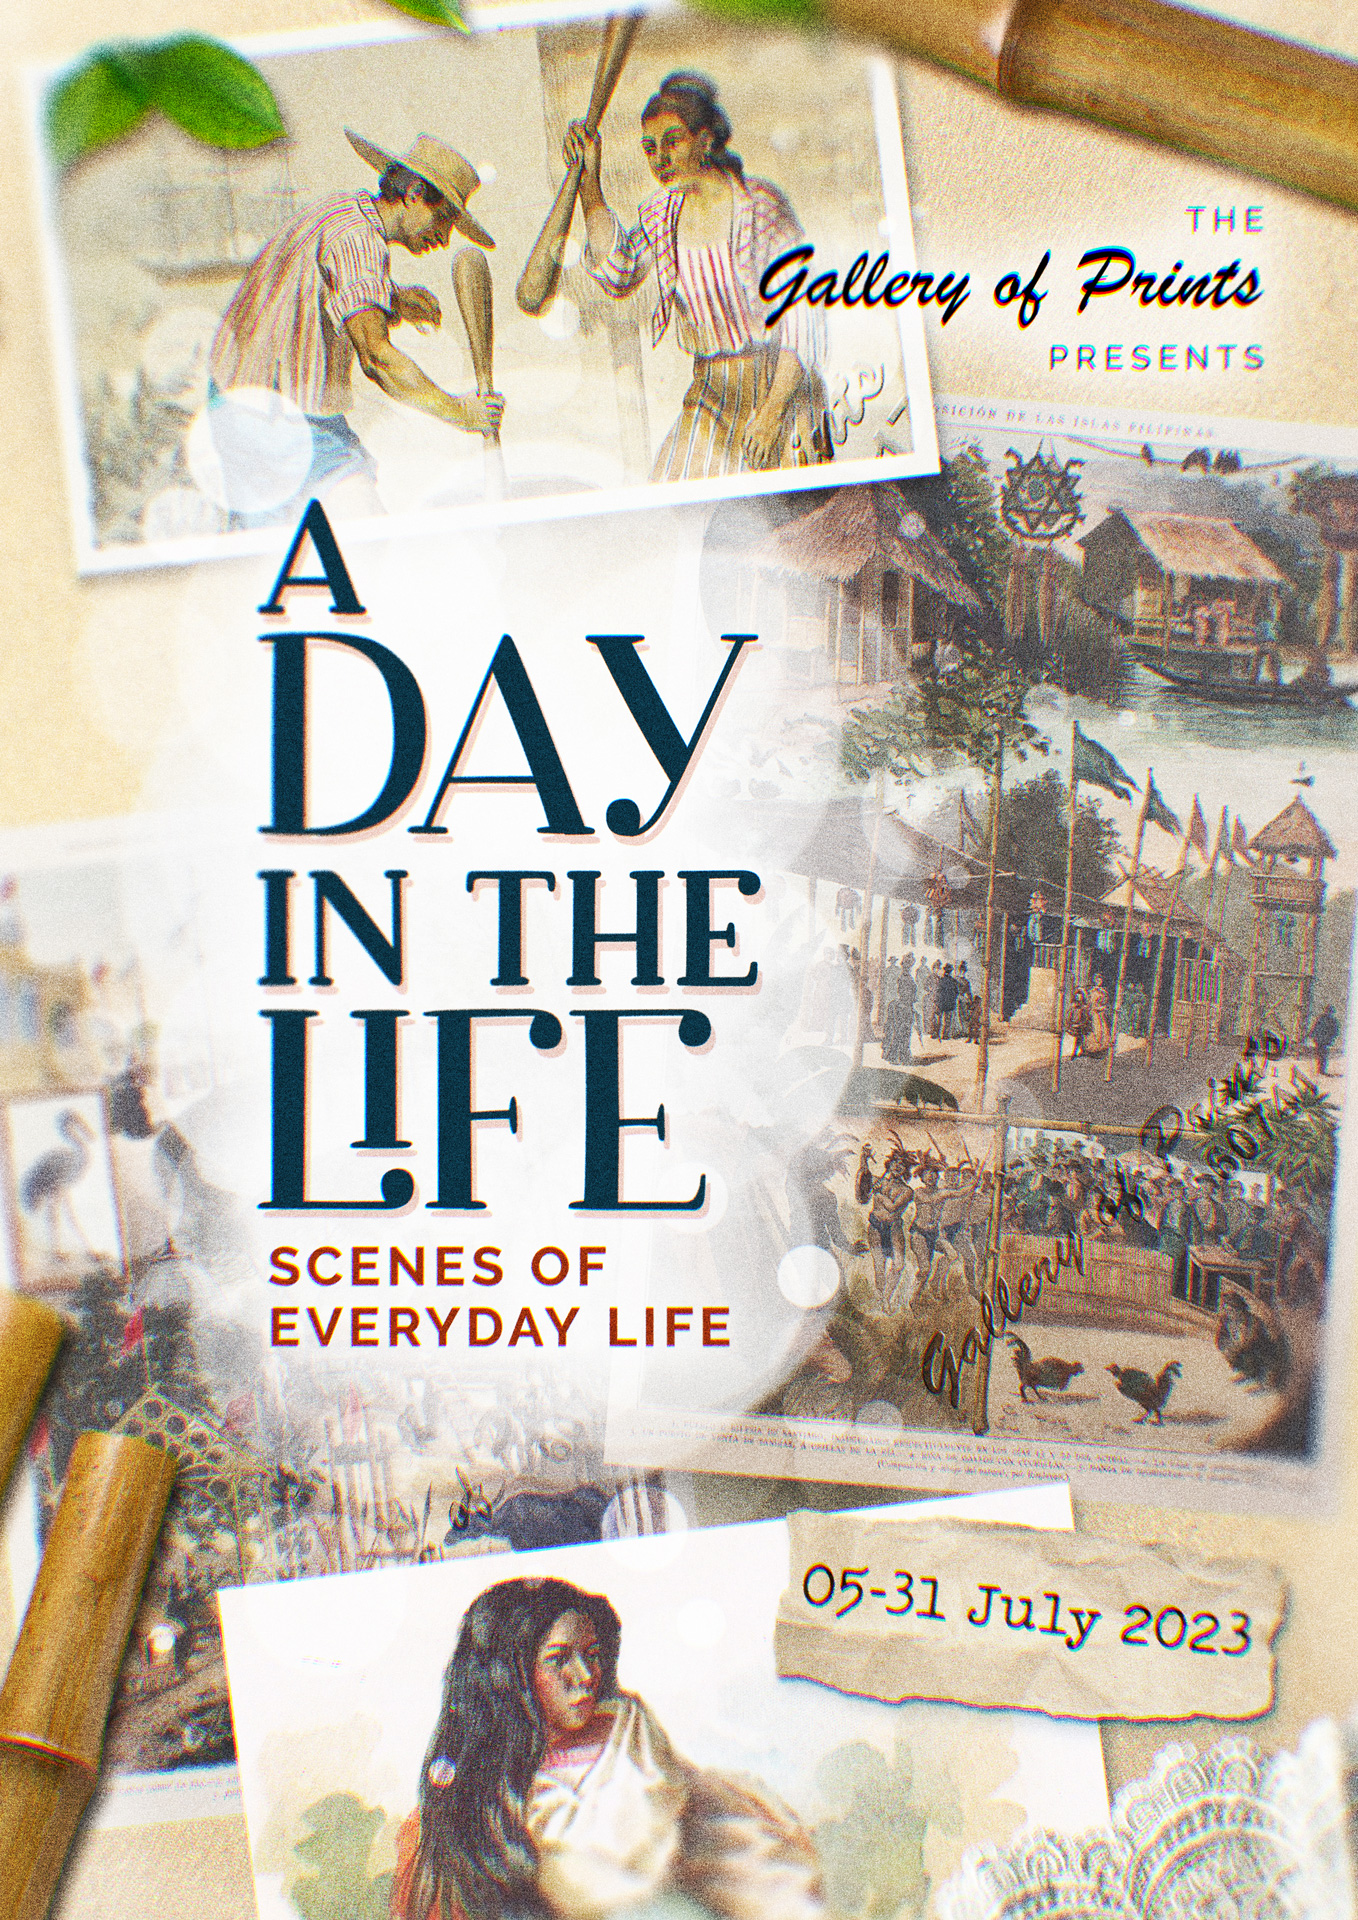 A Day in the Life | Scenes of Everyday Life